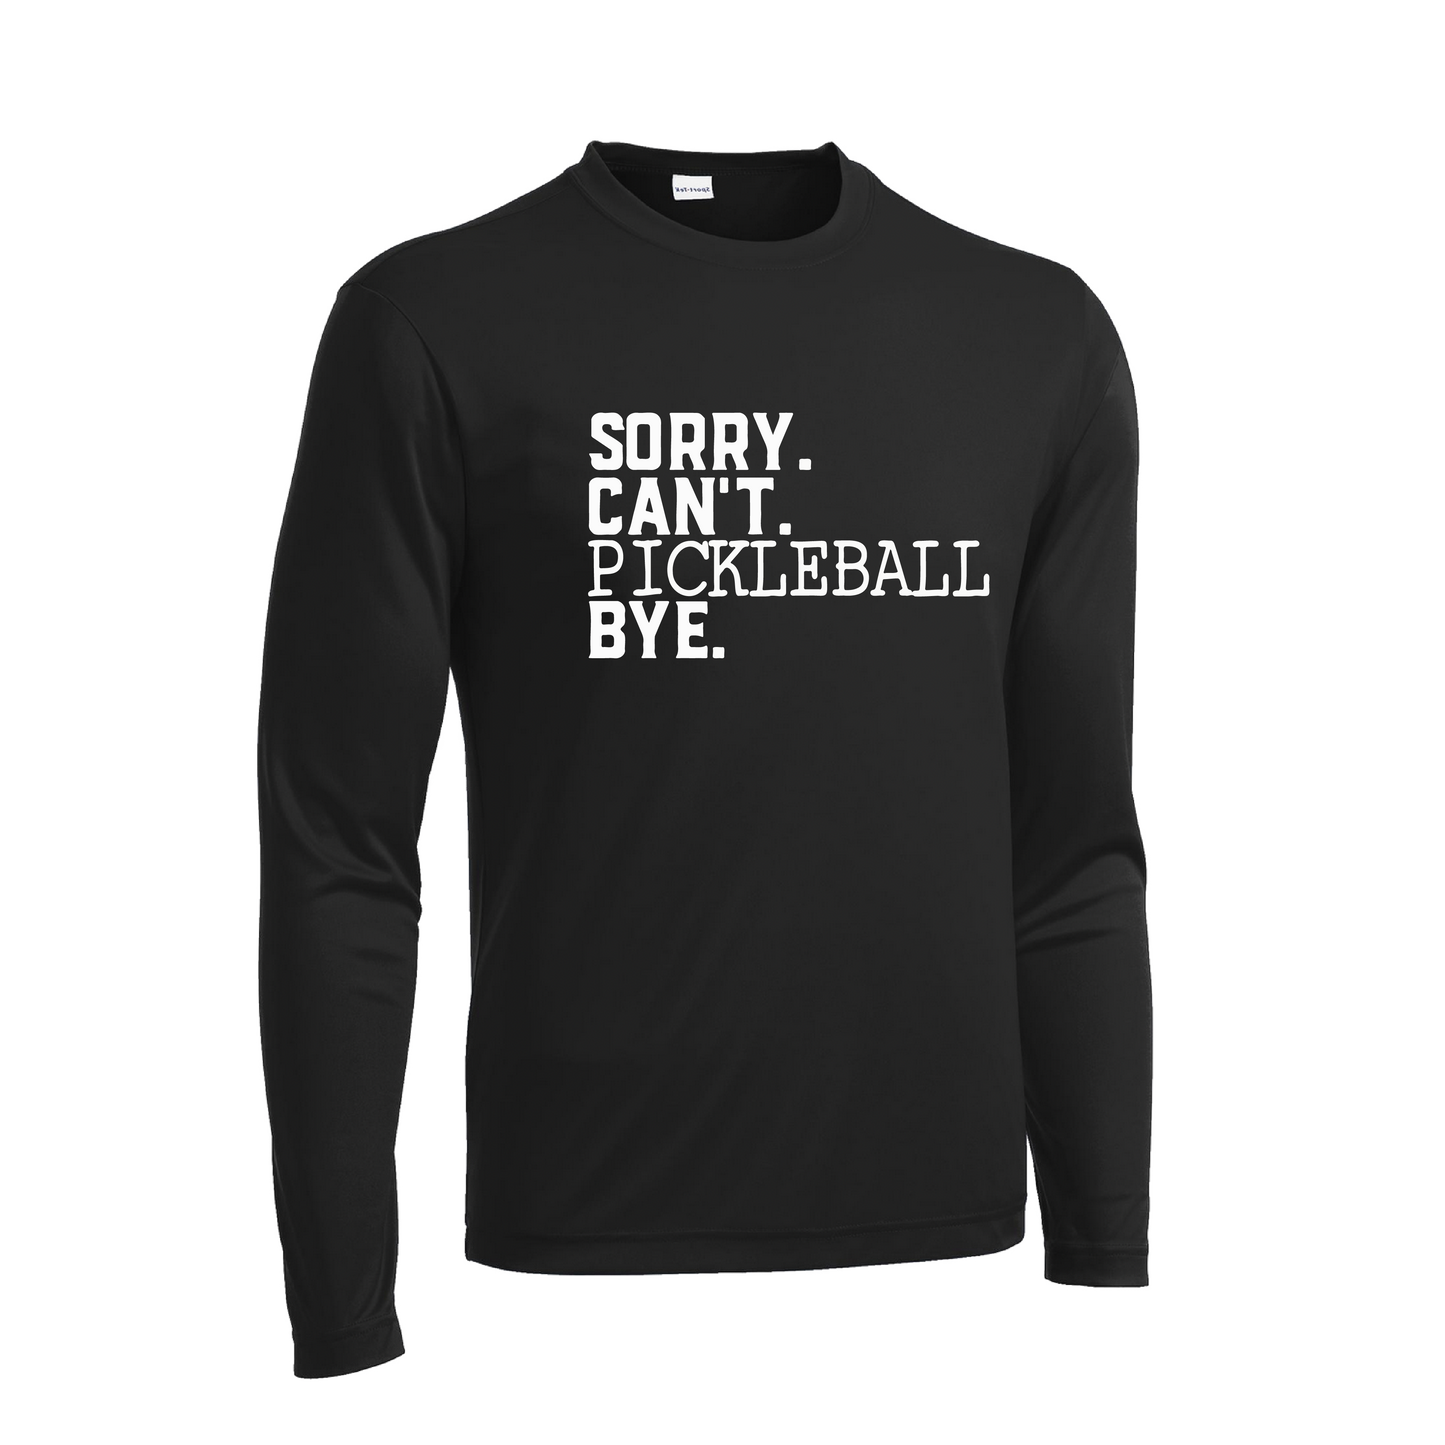 Sorry Can't Pickleball Bye | Men's Long Sleeve Athletic Shirt | 100% Polyester